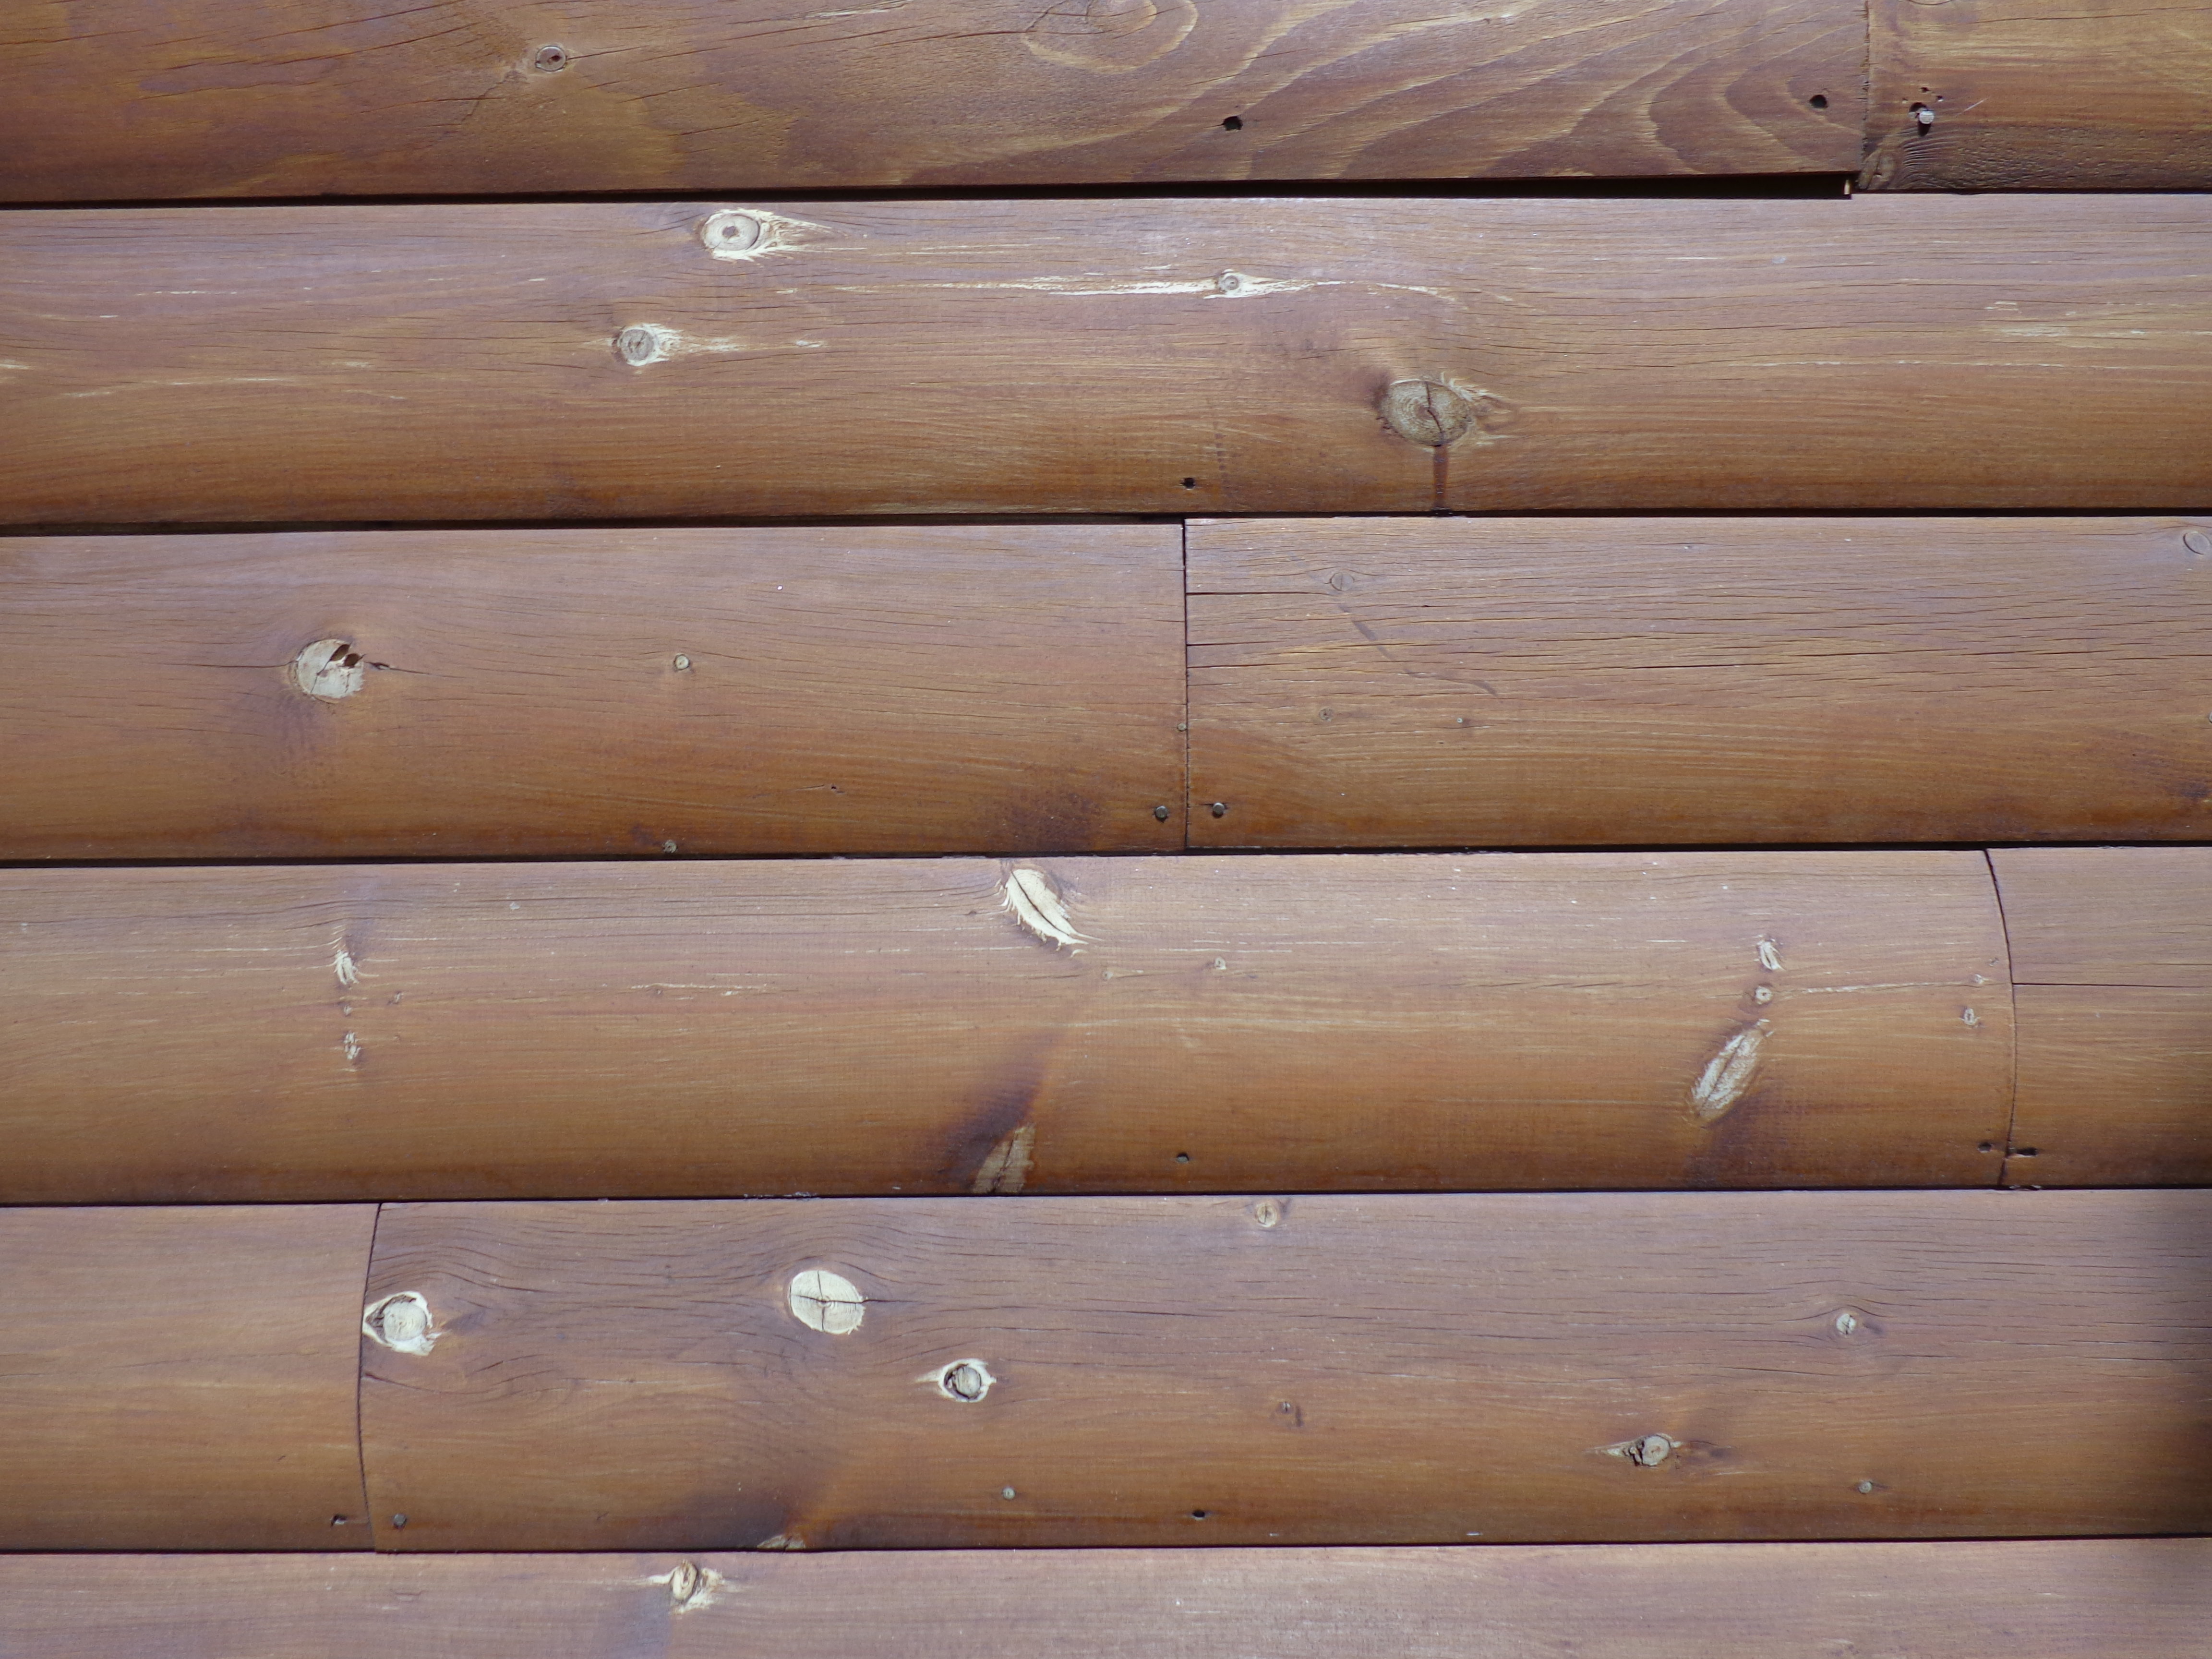 log cabin roof texture